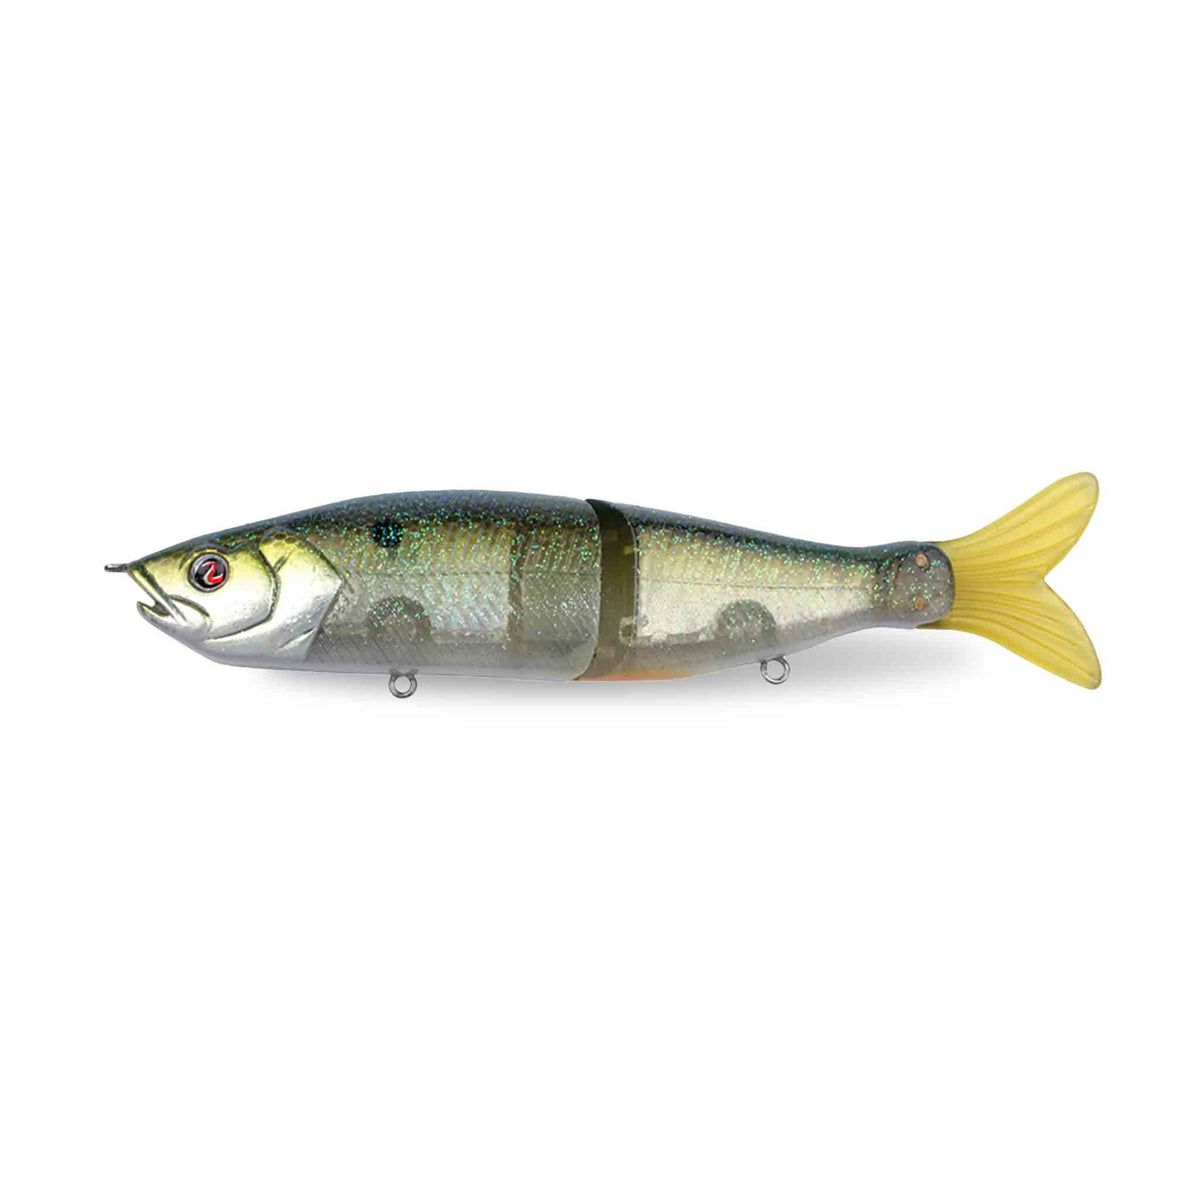 View of Jerk-Glide_Baits River2Sea S-Waver 200S 8" Glide Bait I Know It available at EZOKO Pike and Musky Shop